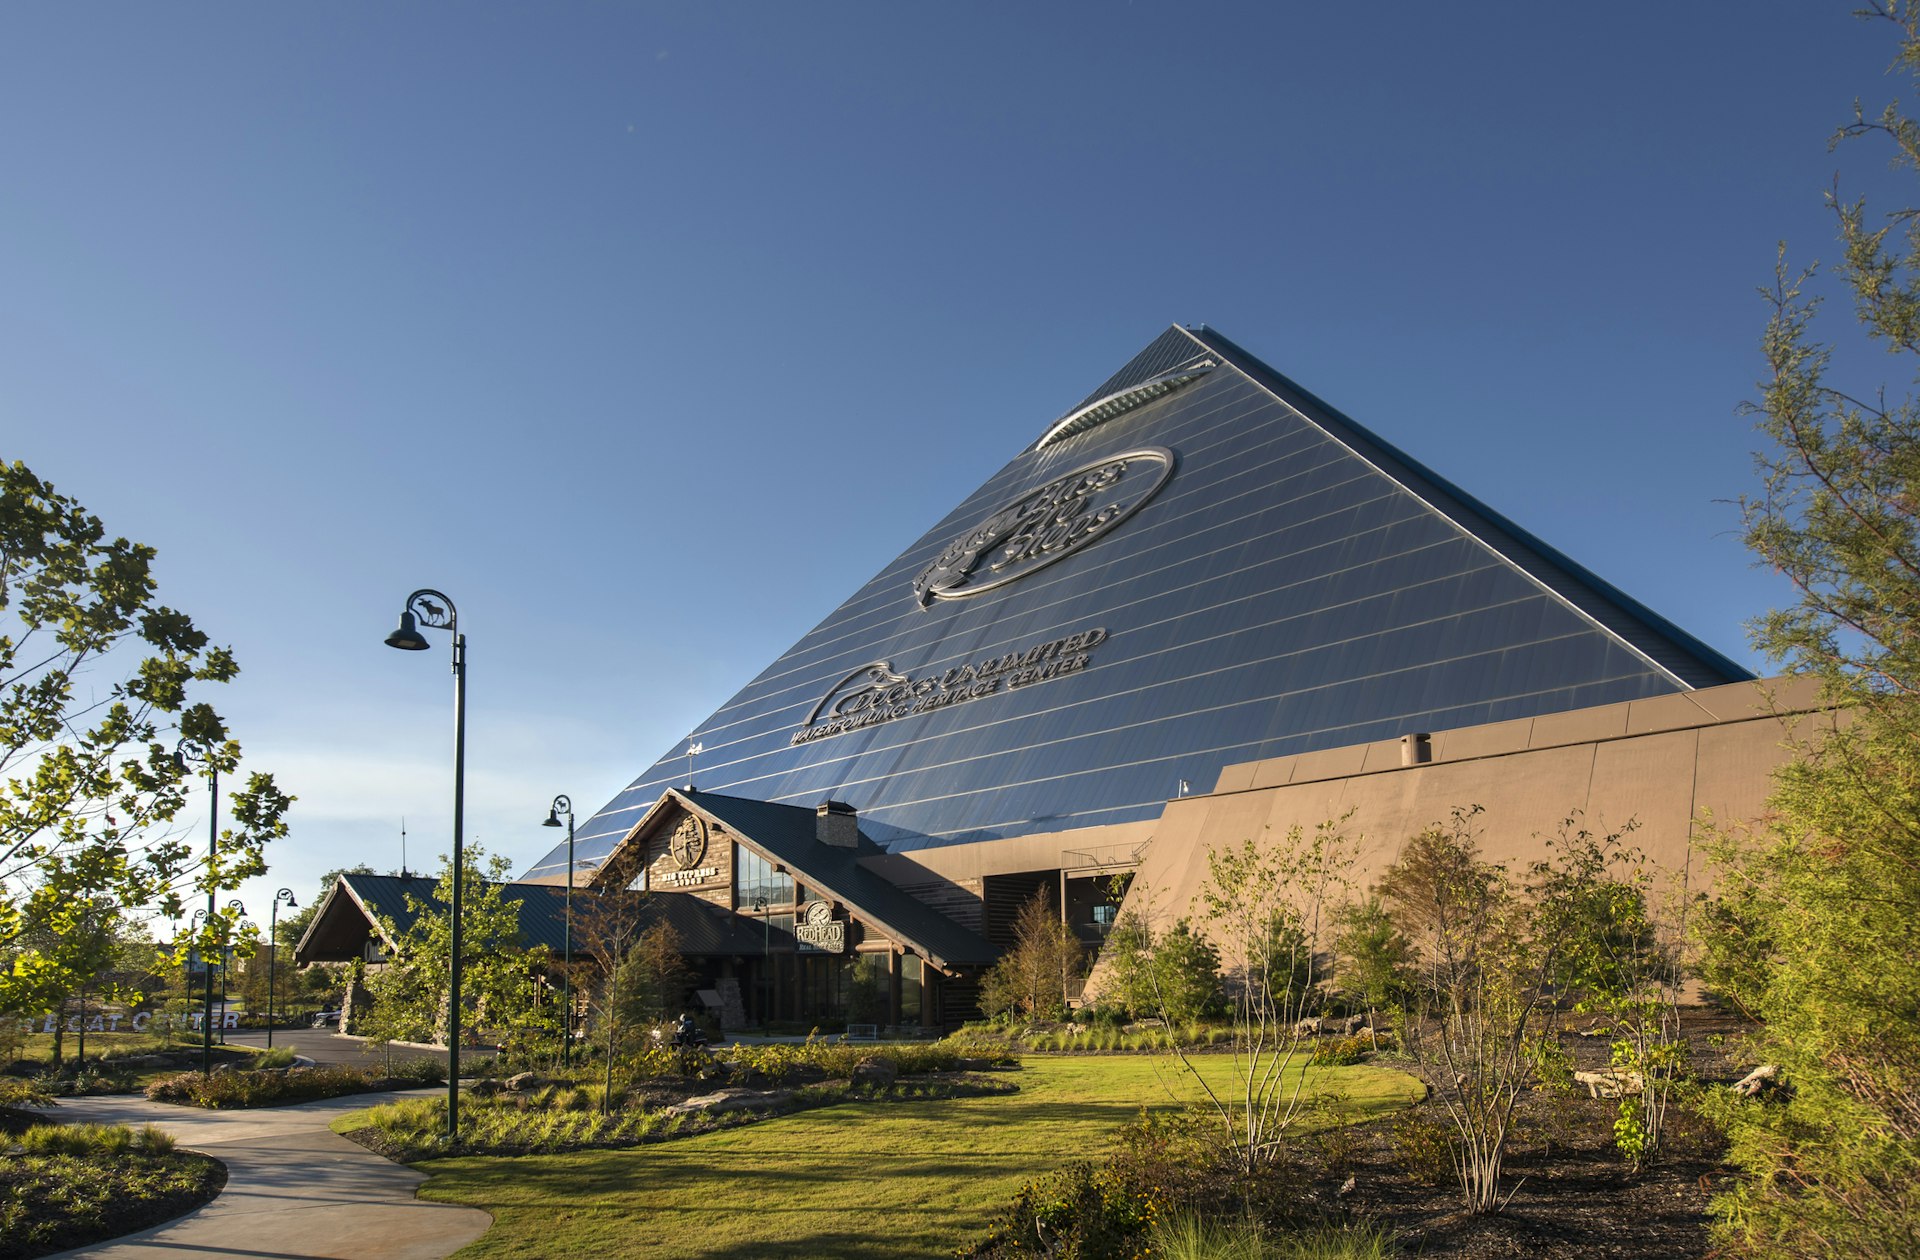 View of The iconic Memphis Pyramid , which has been transformed into a massive wilderness-inspired Bass Pro Shops and rustic-elegant hotel.